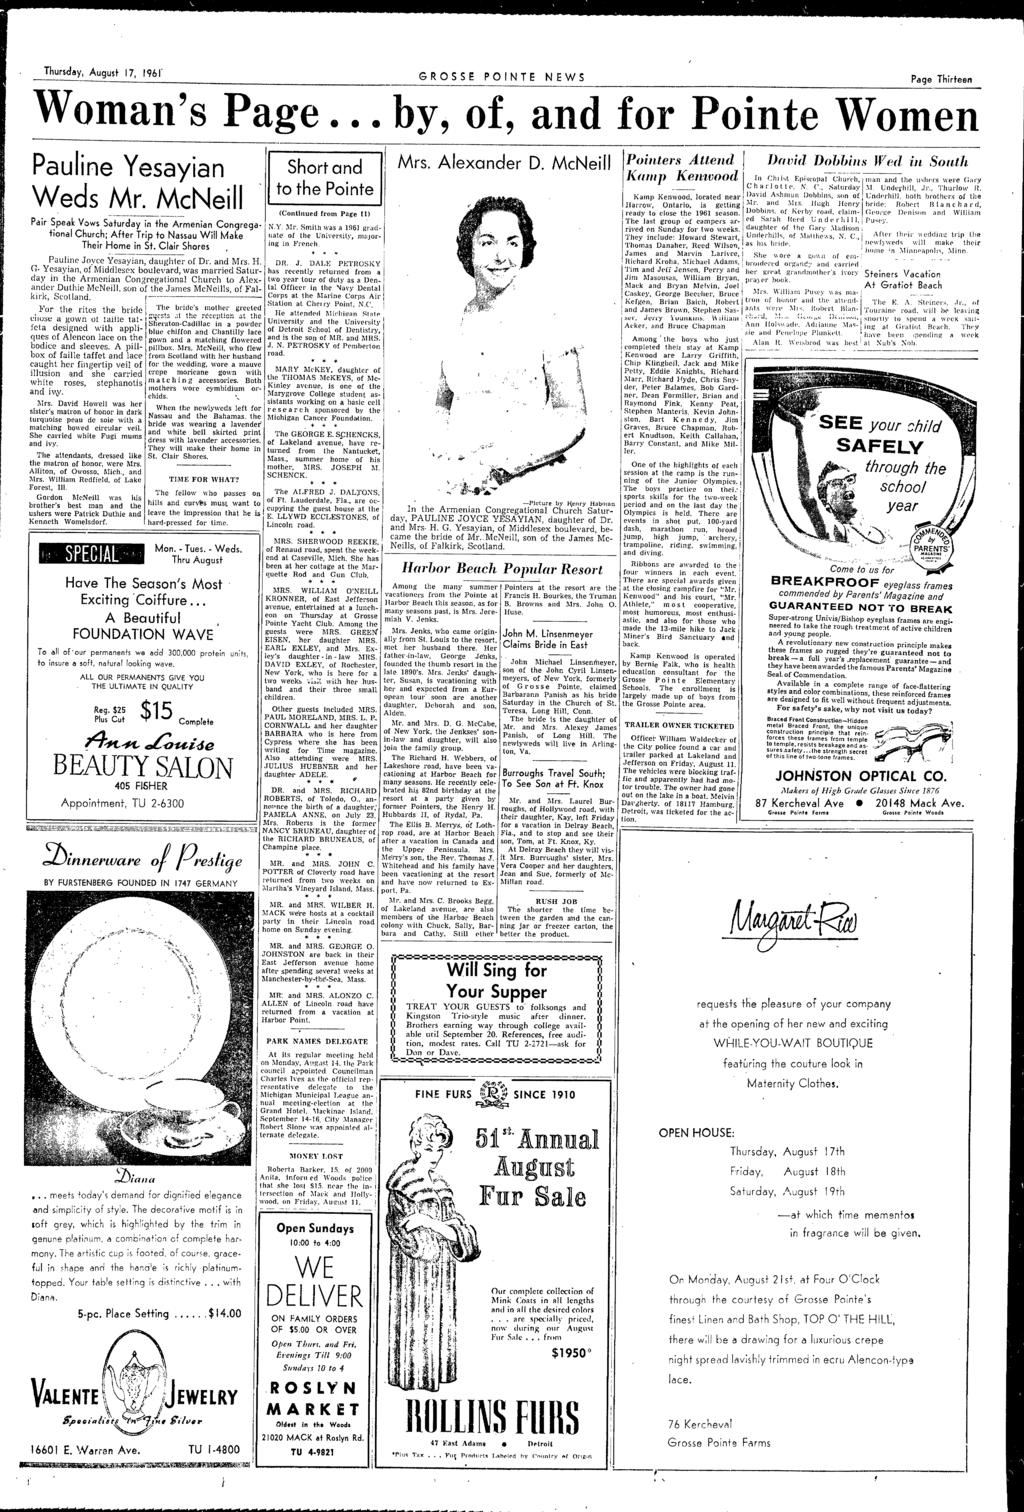 Aftpr1l1('il' ~rsday August 17 1961' GROSSe PONTE NEWS Page Thirteen Woman's Page by of and for Pointe Women Pauline Yesayian Weds Mr.